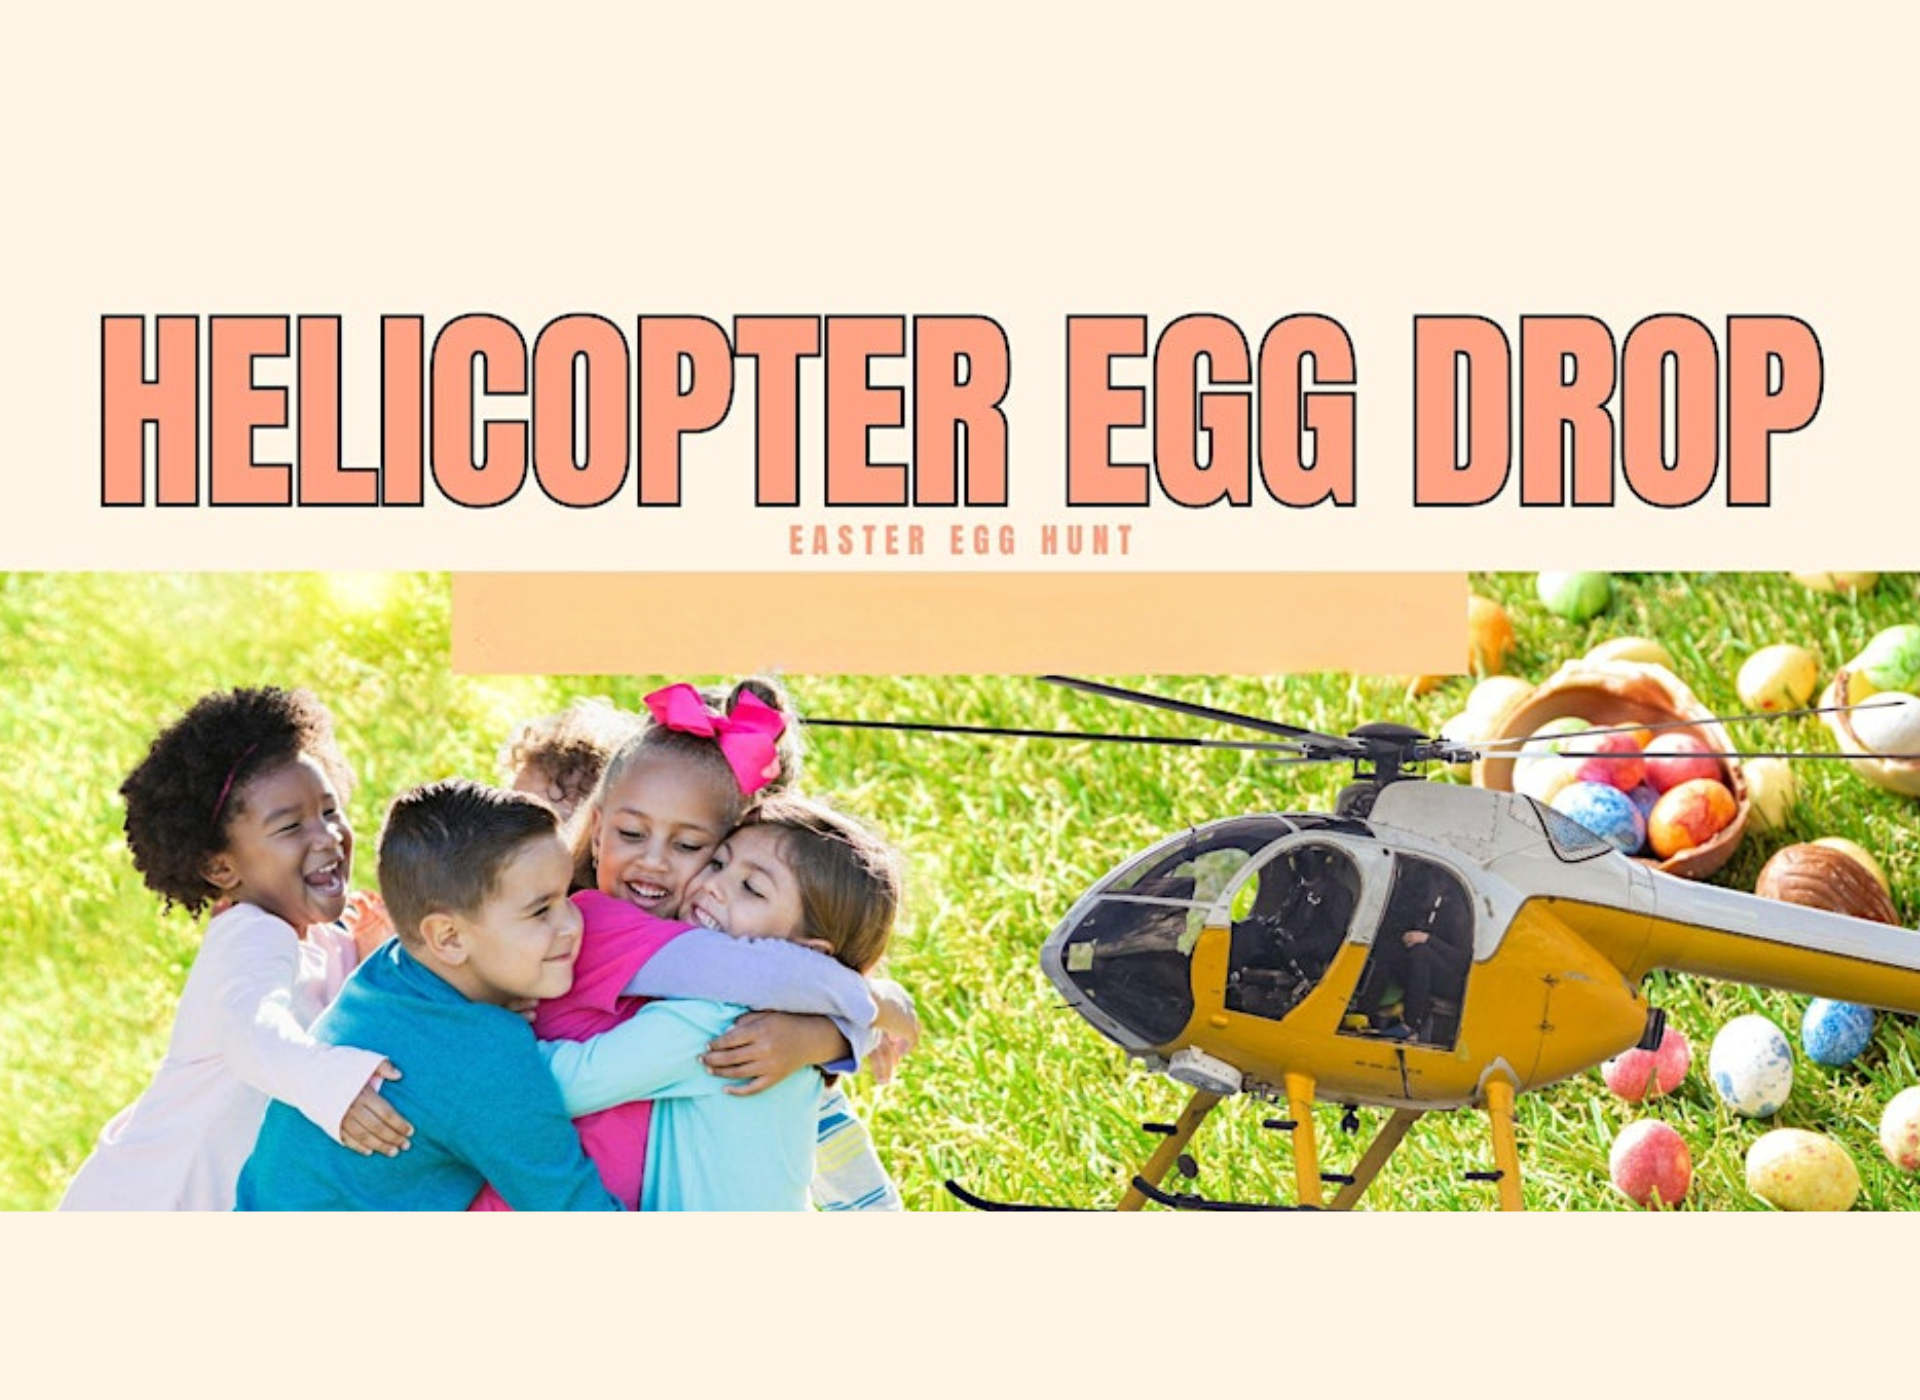 NOW Church - Helicopter Egg Drop